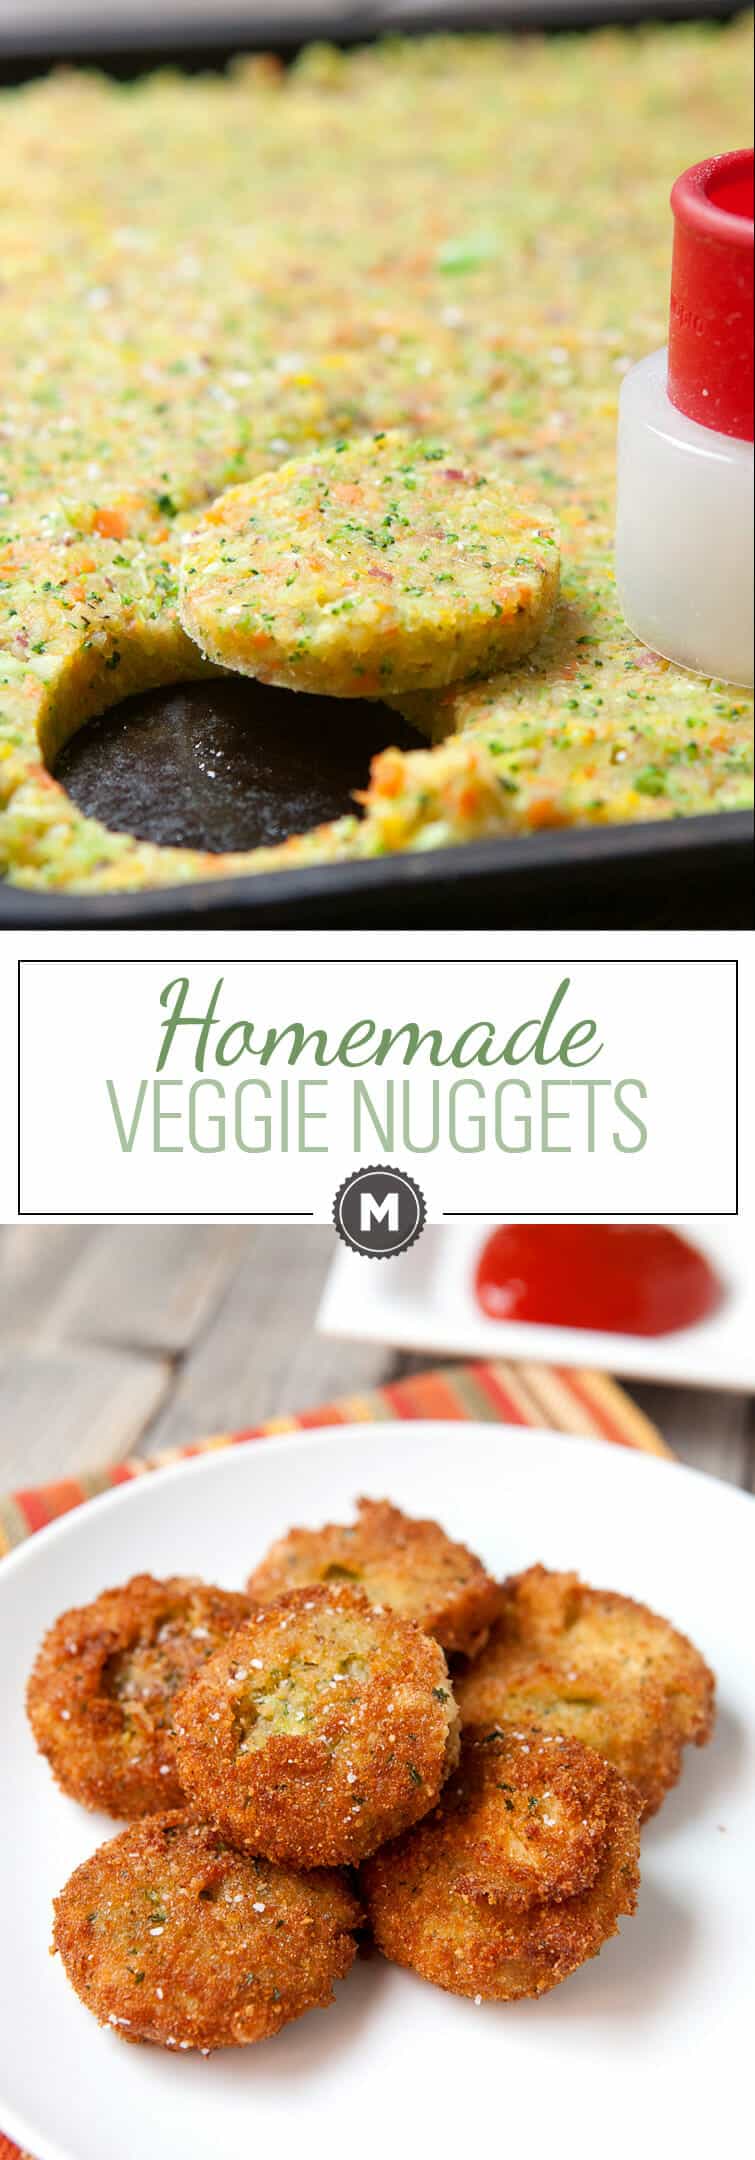 Homemade Veggie Nuggets: These are the perfect vegetarian alternative to the chicken nugget. Made with mashed carrots, broccoli, and golden beets. They are slightly sweet and perfectly crispy! | macheesmo.com